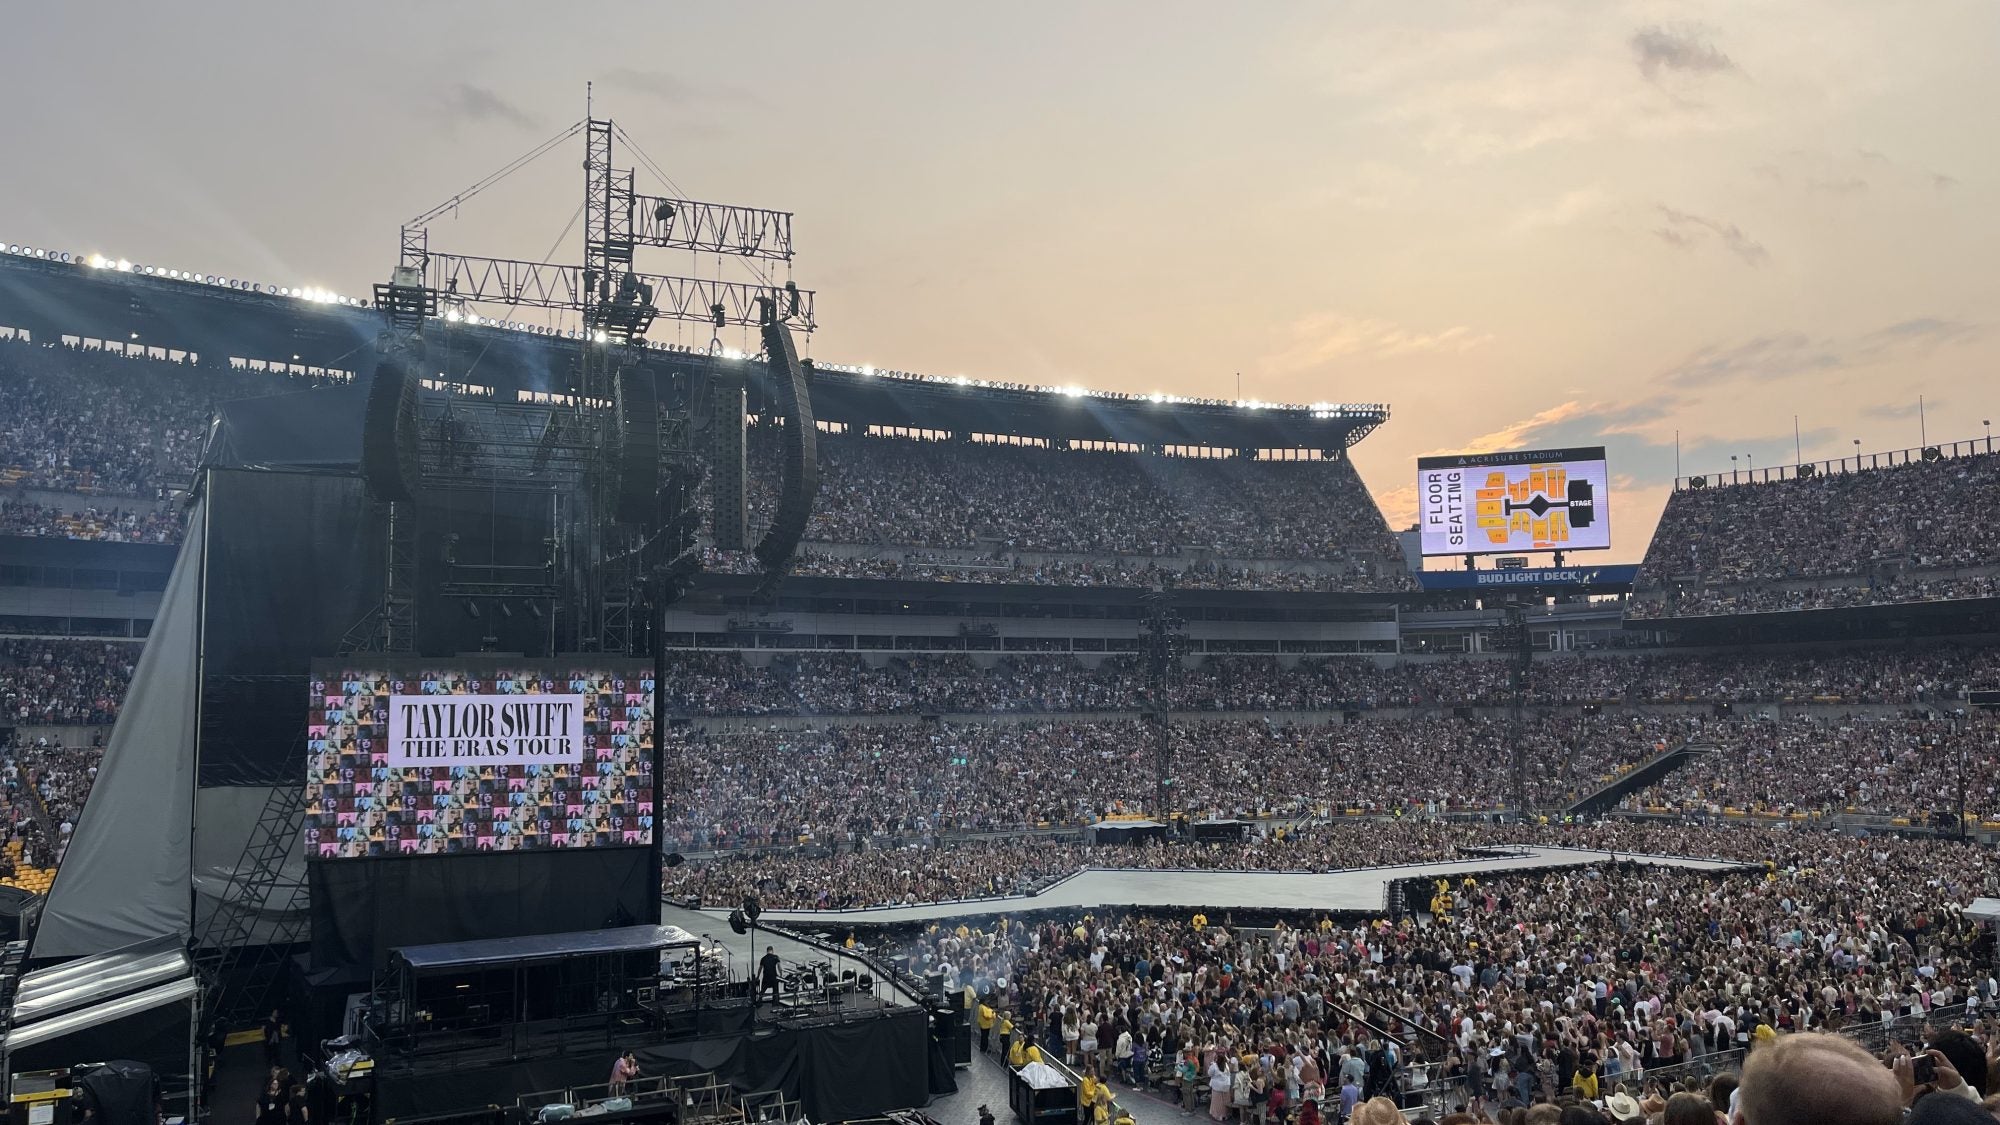 Photo of Eras Tour concert in a packed stadium